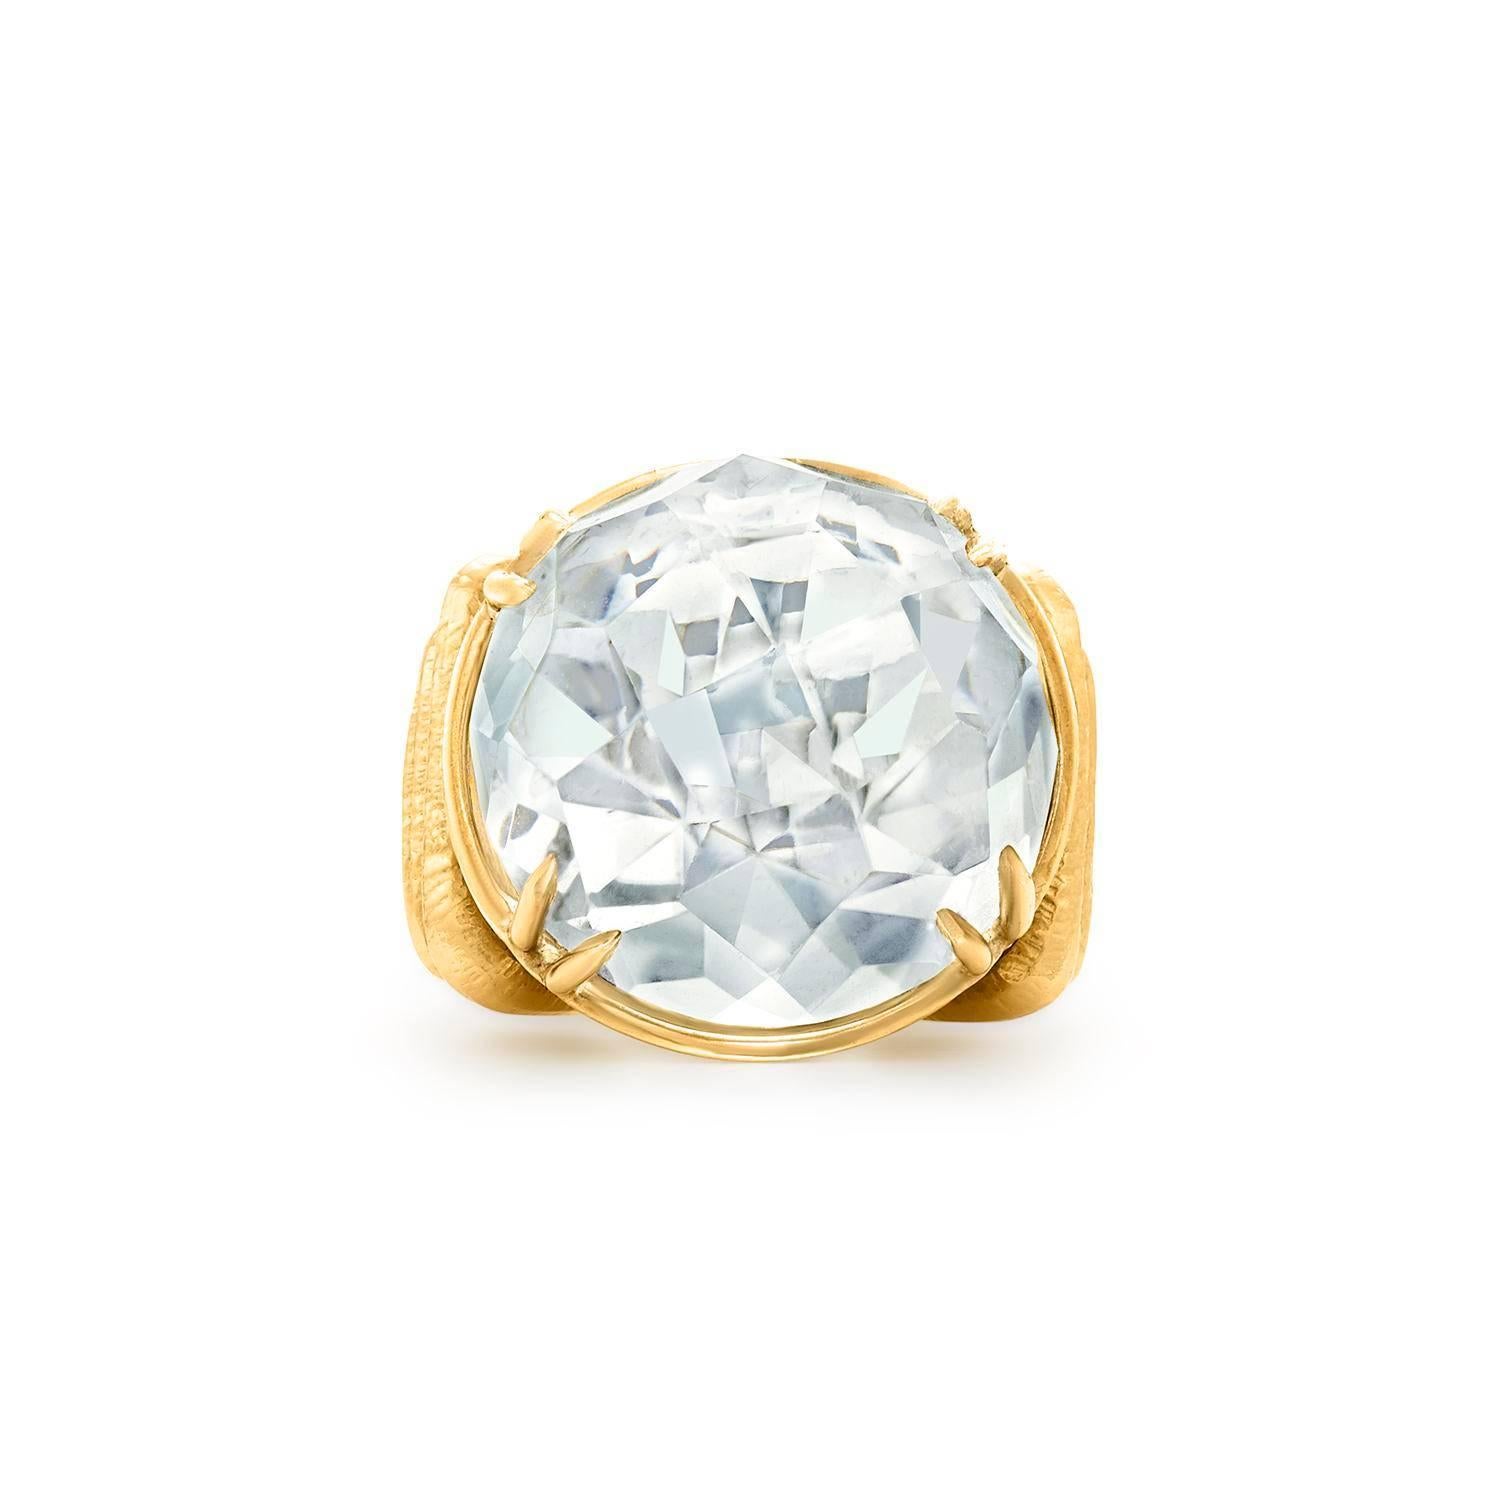 Set with a faceted rock crystal within a hammered 18k gold ring, size 6

Signed David Webb

David Webb is the quintessential American jeweler and this ring is a great example of his work - bold, original and modern.

